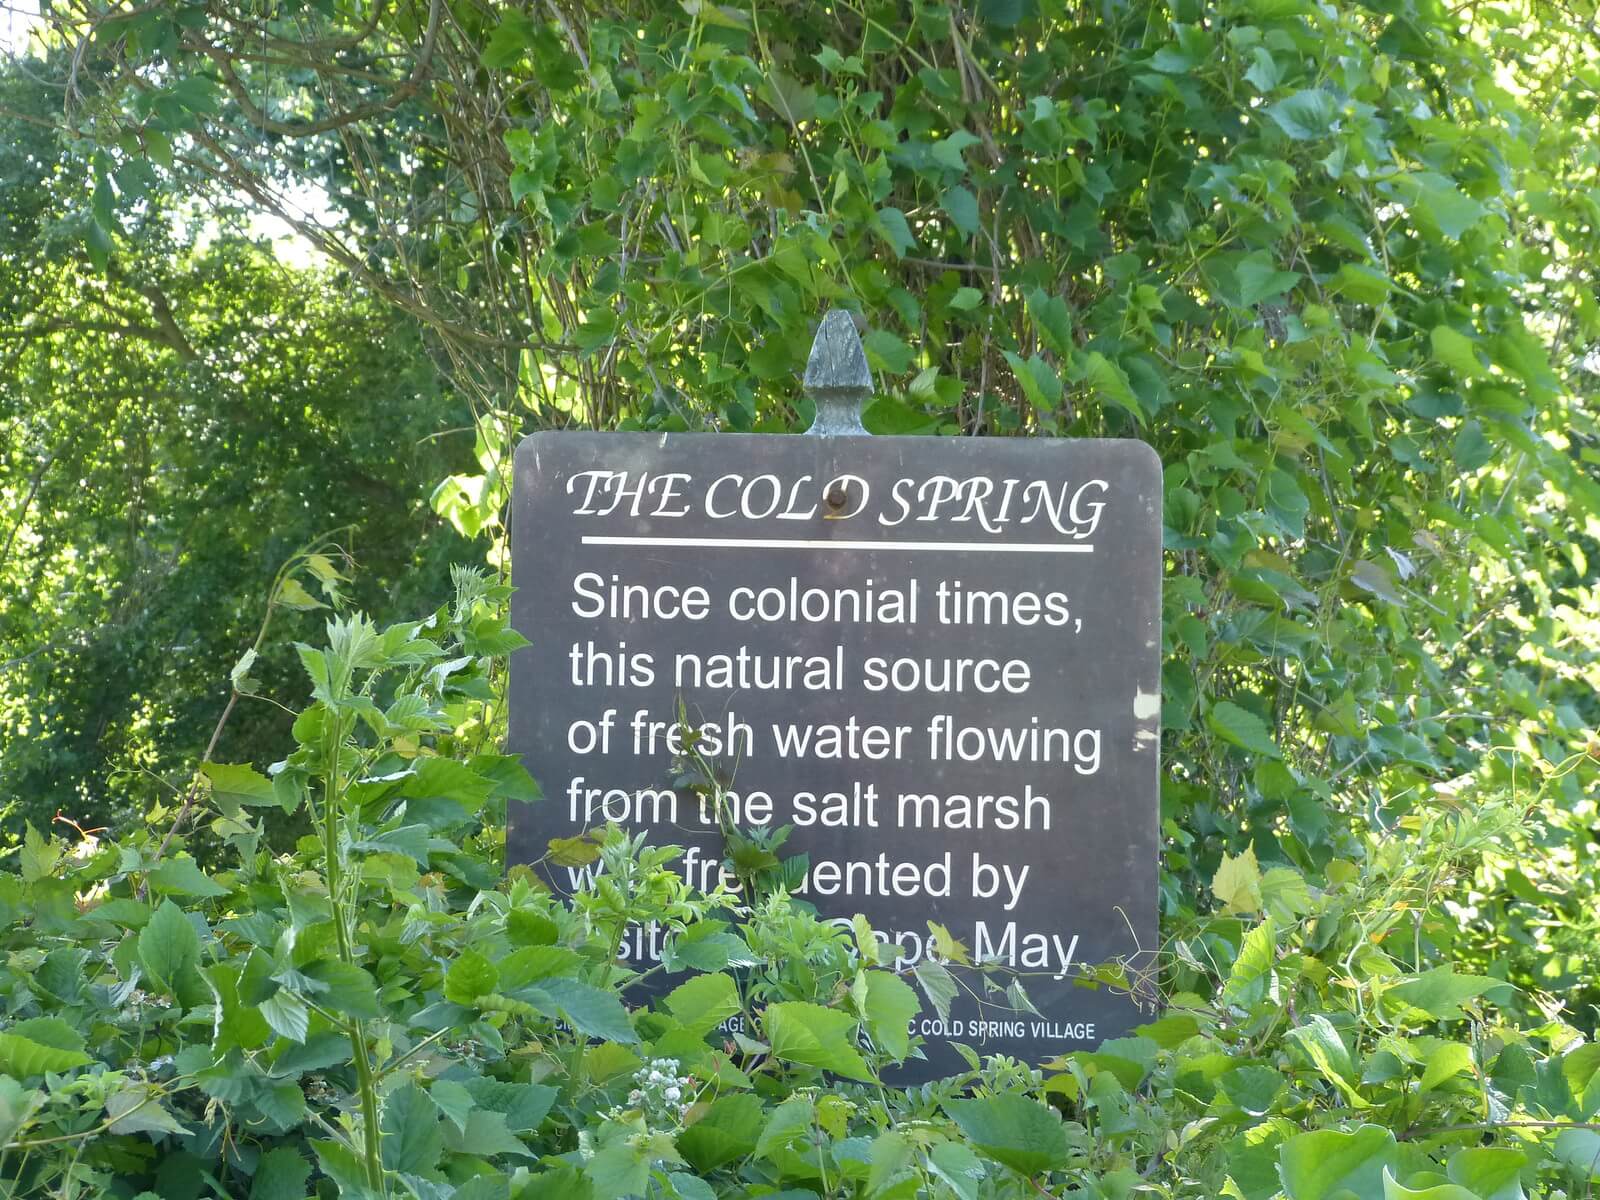 A sign at the site of the Cold Spring